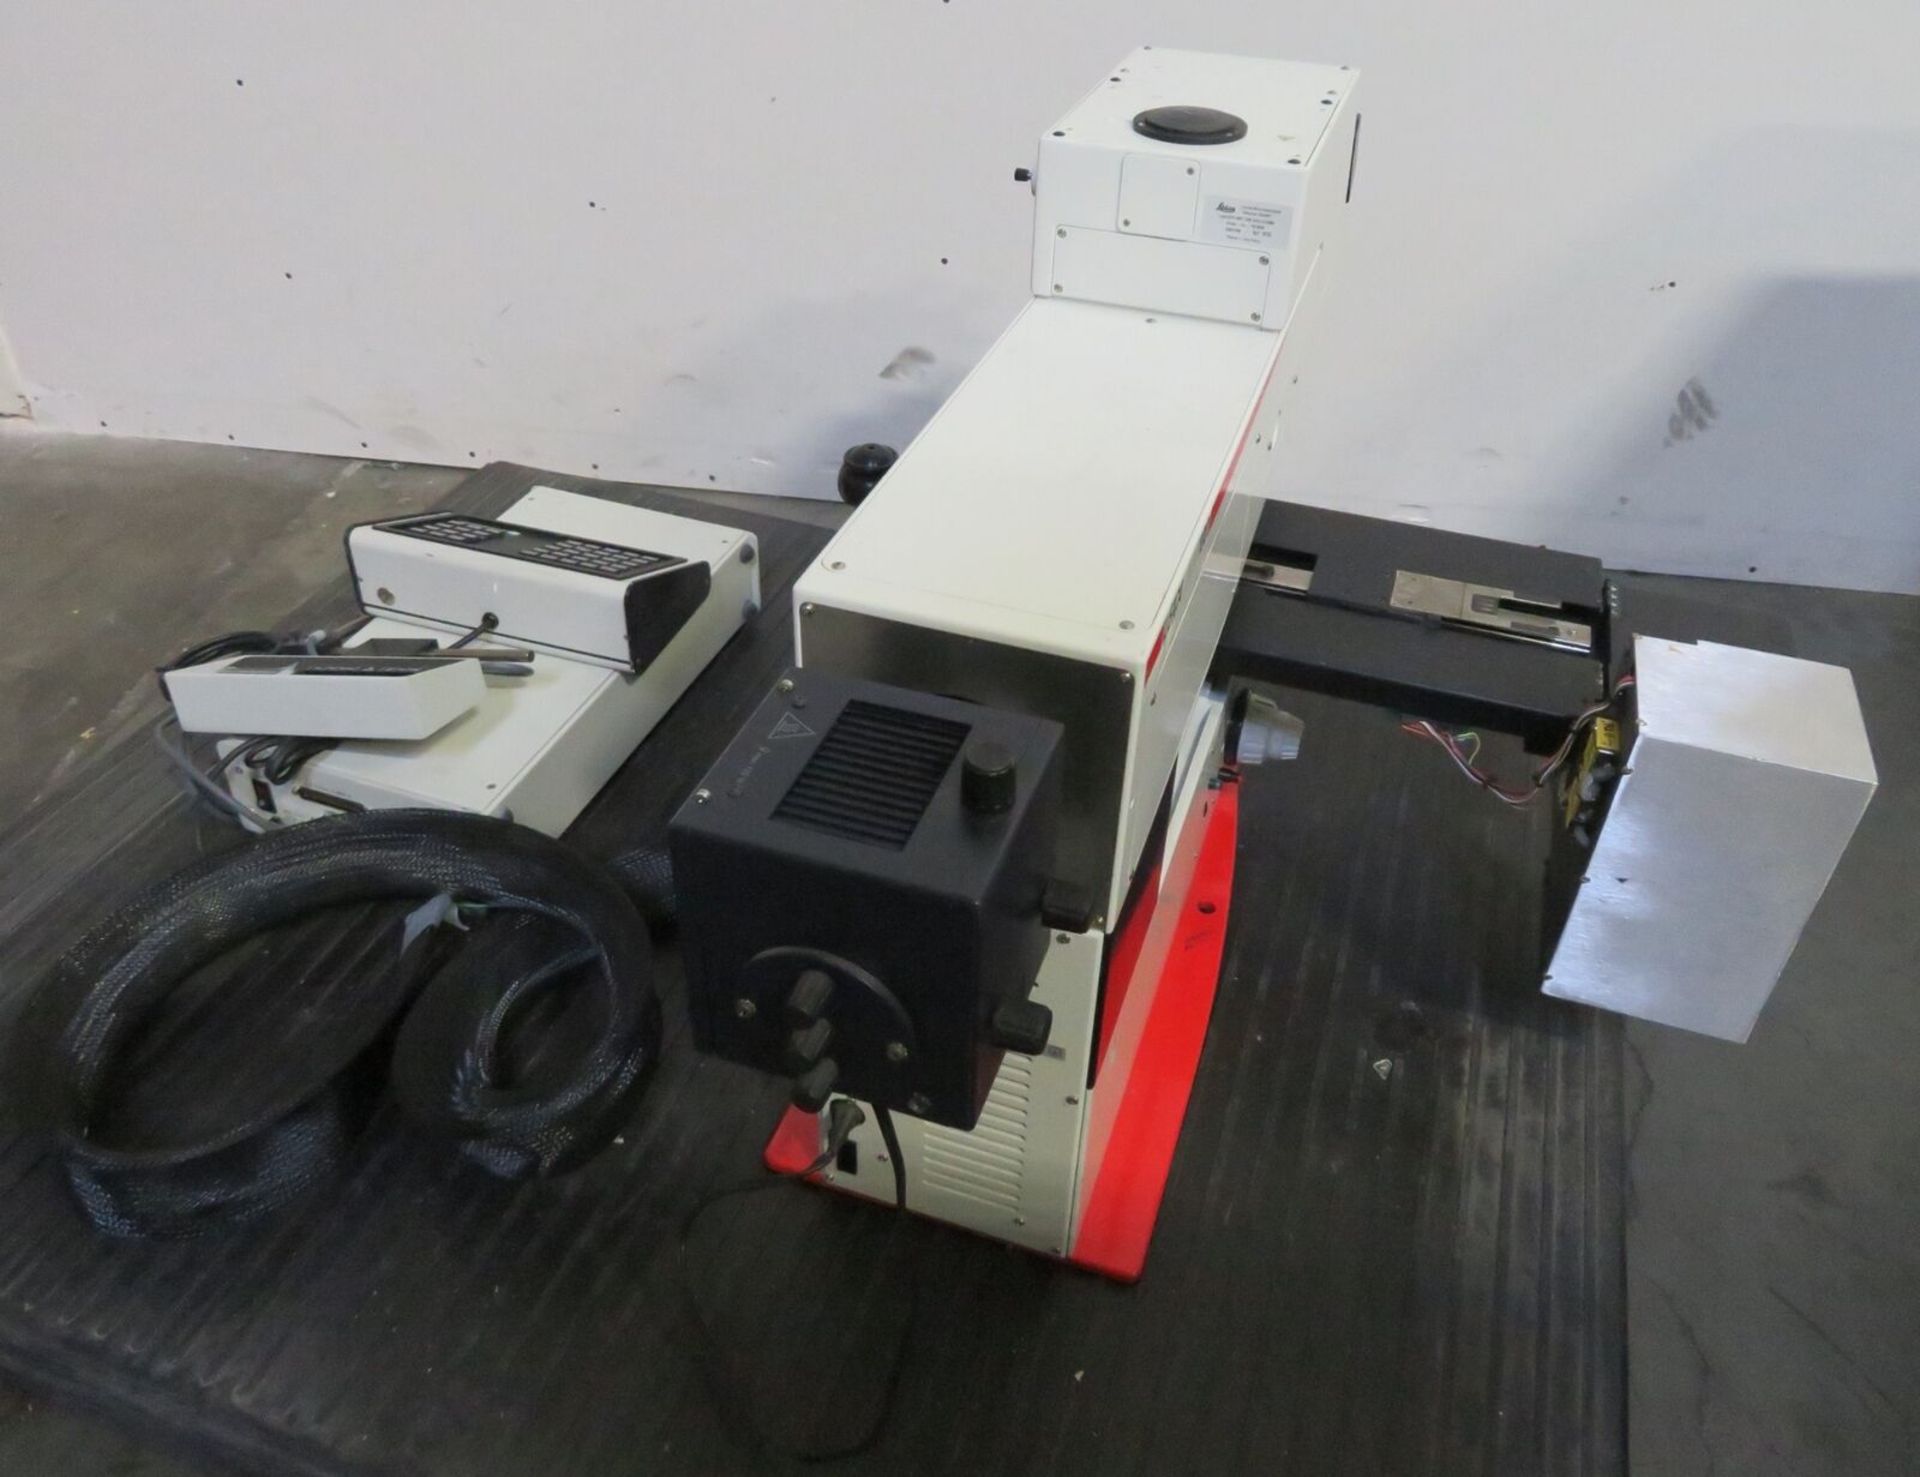 Leica INM100 Inspection Microscope w/Brooks UltraStation XT Wafer Loader - Gilroy - Image 10 of 13